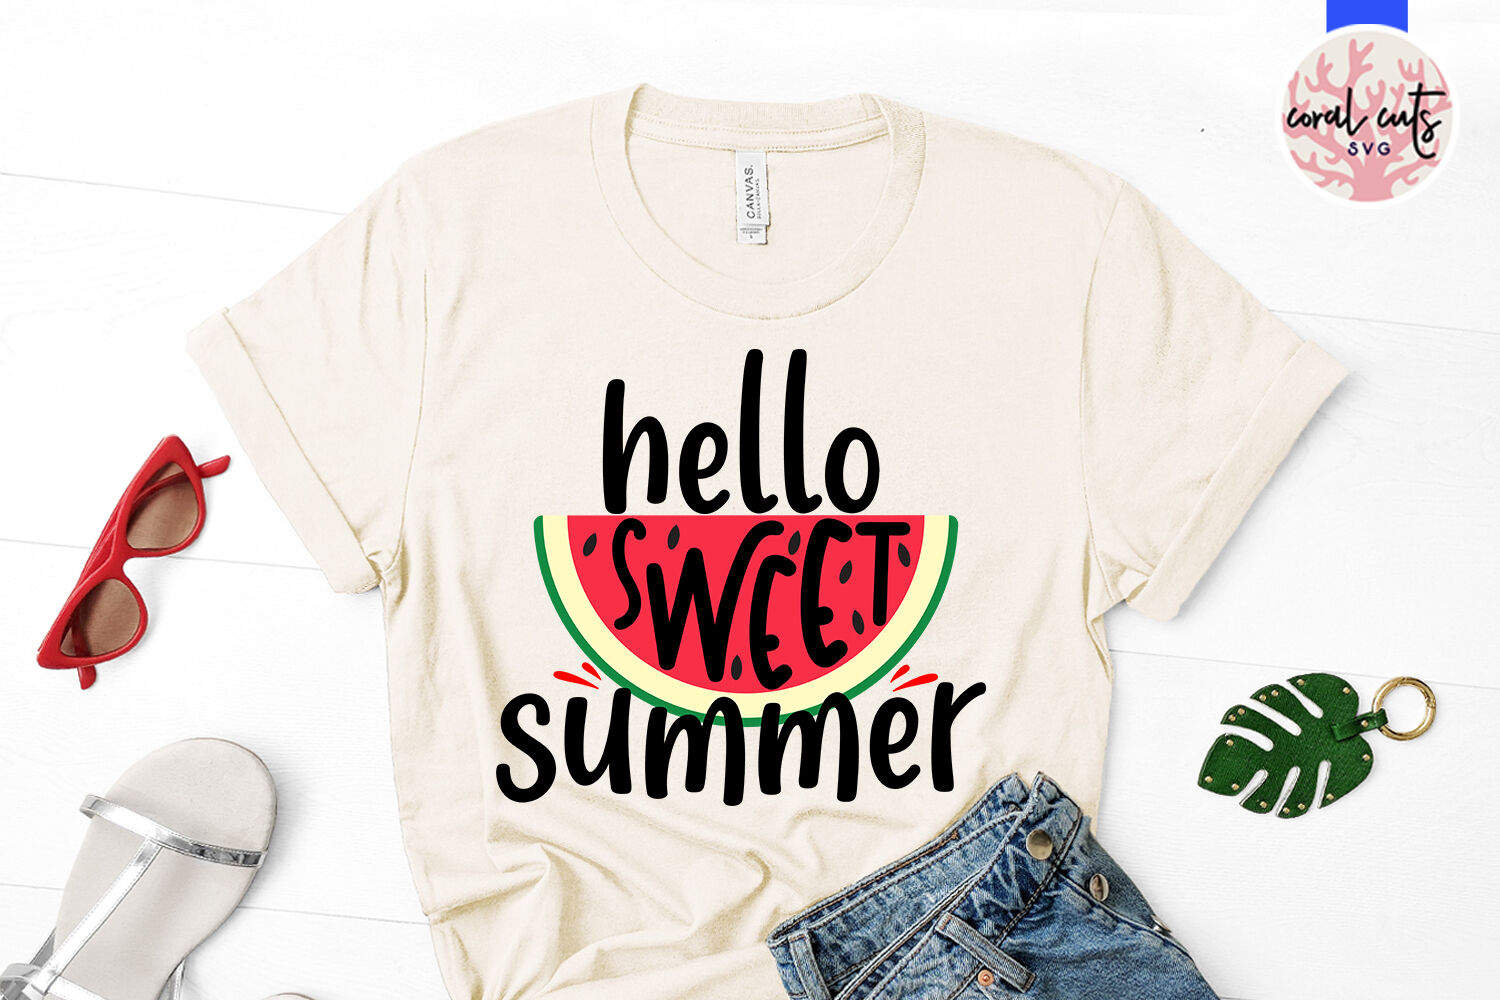 Download Hello sweet summer - Summer SVG EPS DXF PNG Cut File By ...